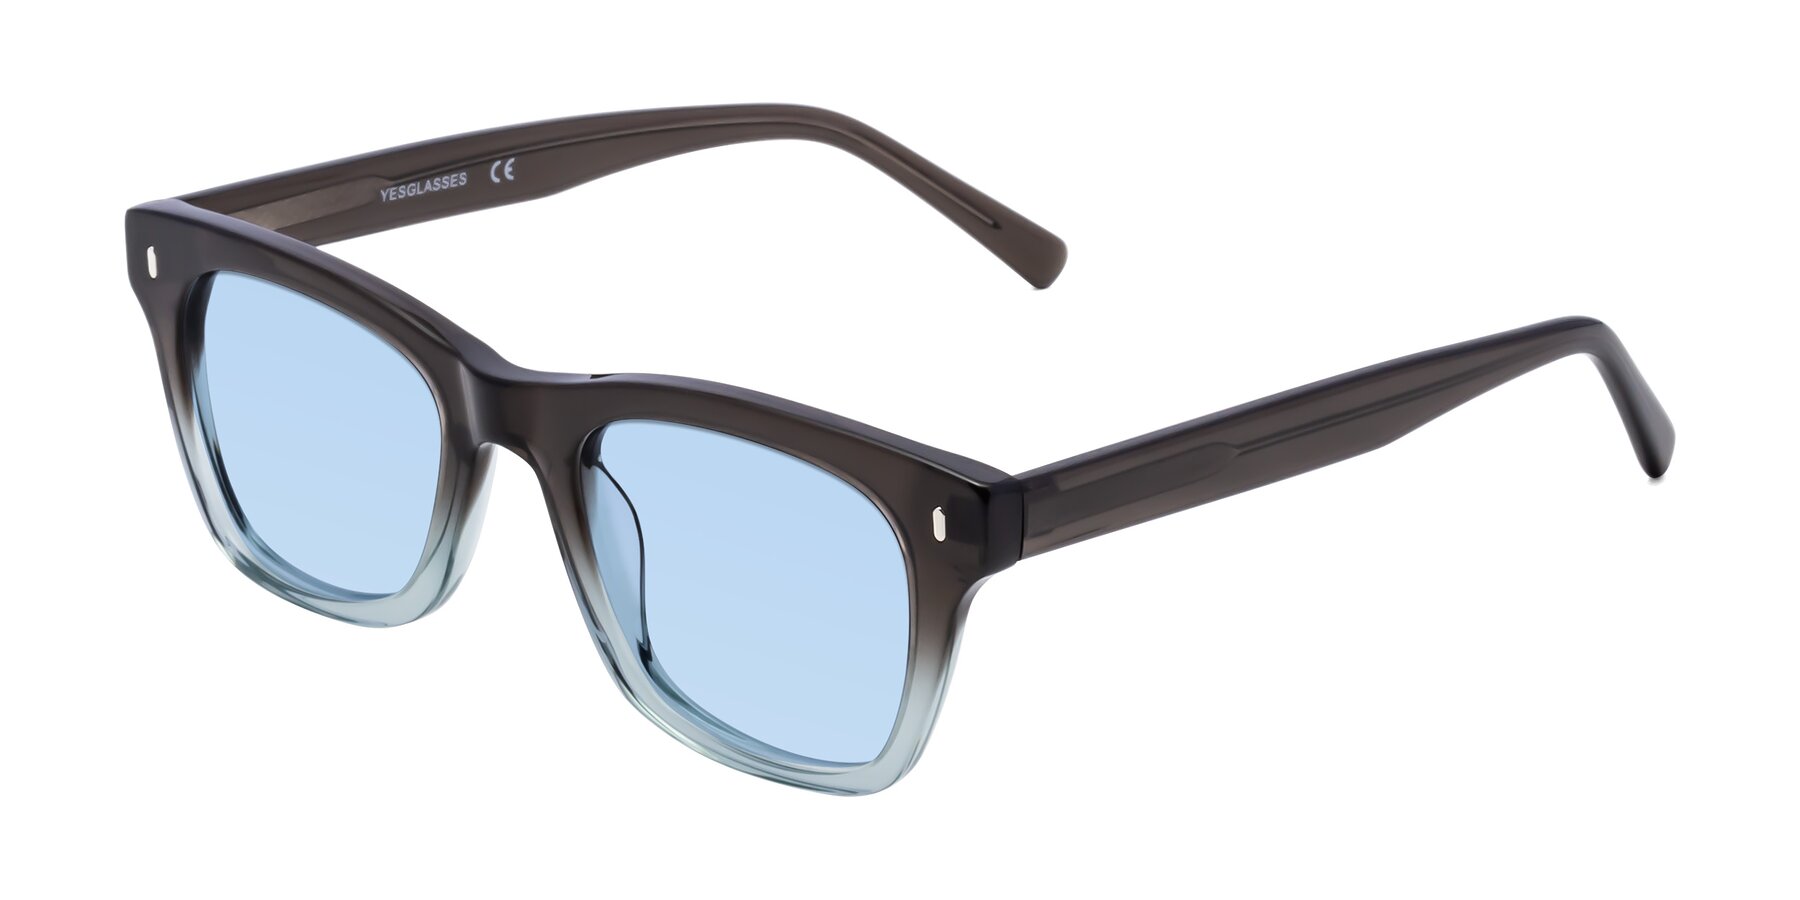 Angle of 17329 in Dark Brown with Light Blue Tinted Lenses